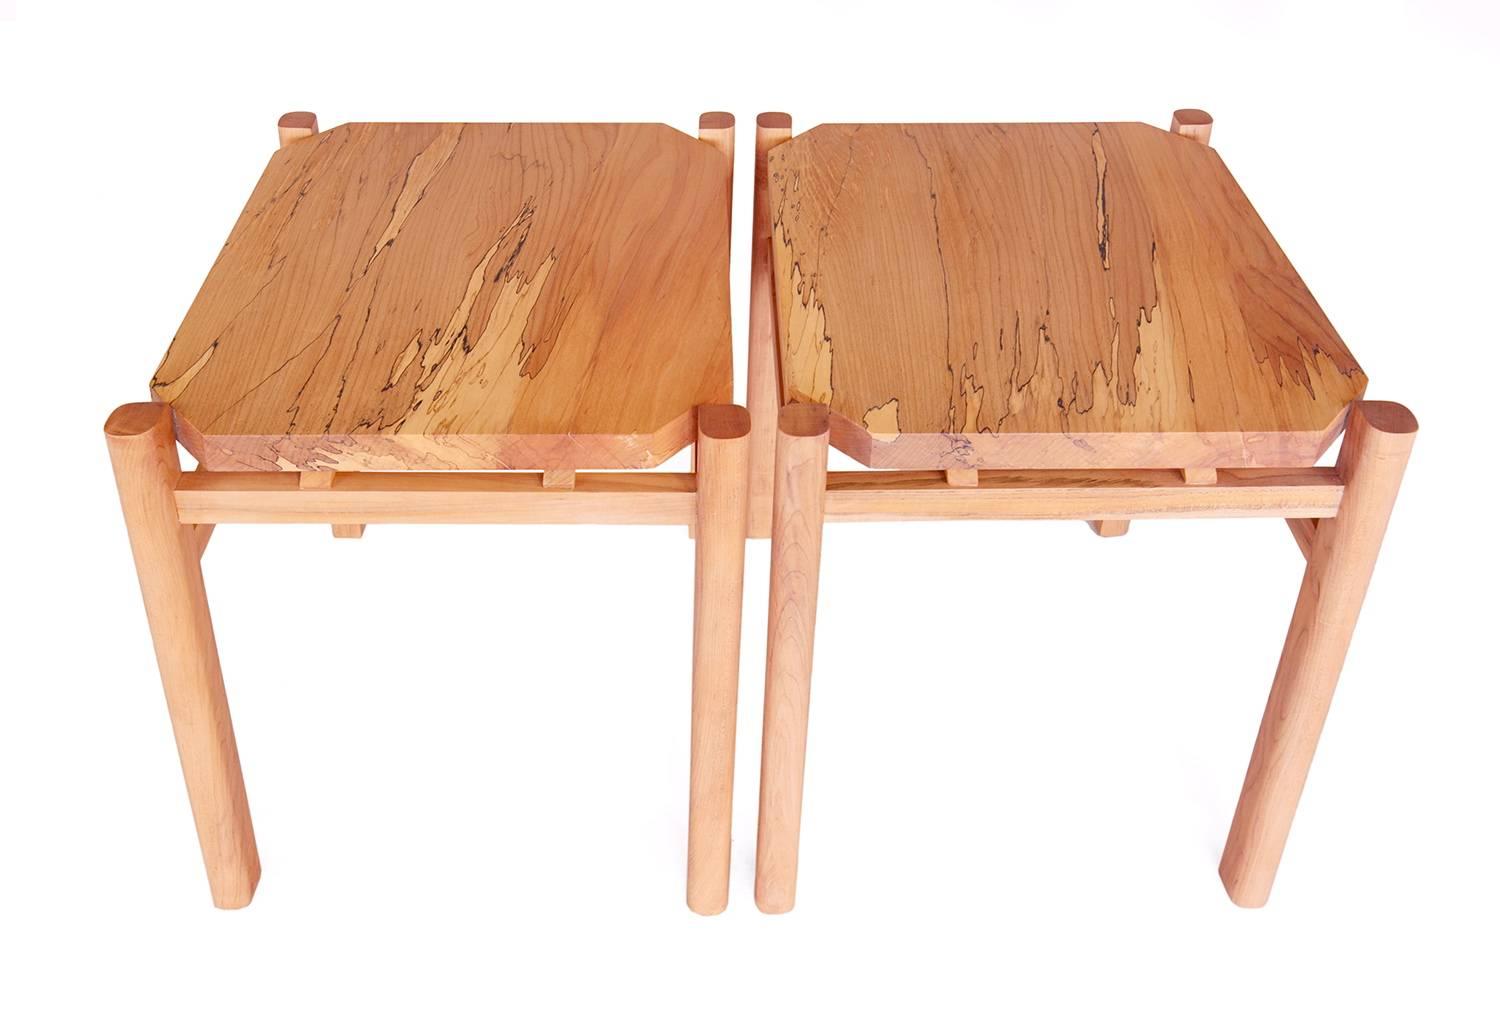 New York Heartwoods' spalted maple Simard side or end tables are modern yet timeless, have faceted tops nested between teardrop-shaped posts, and are influenced by contemporary, mid-century and Asian design. Each is sold individually and is